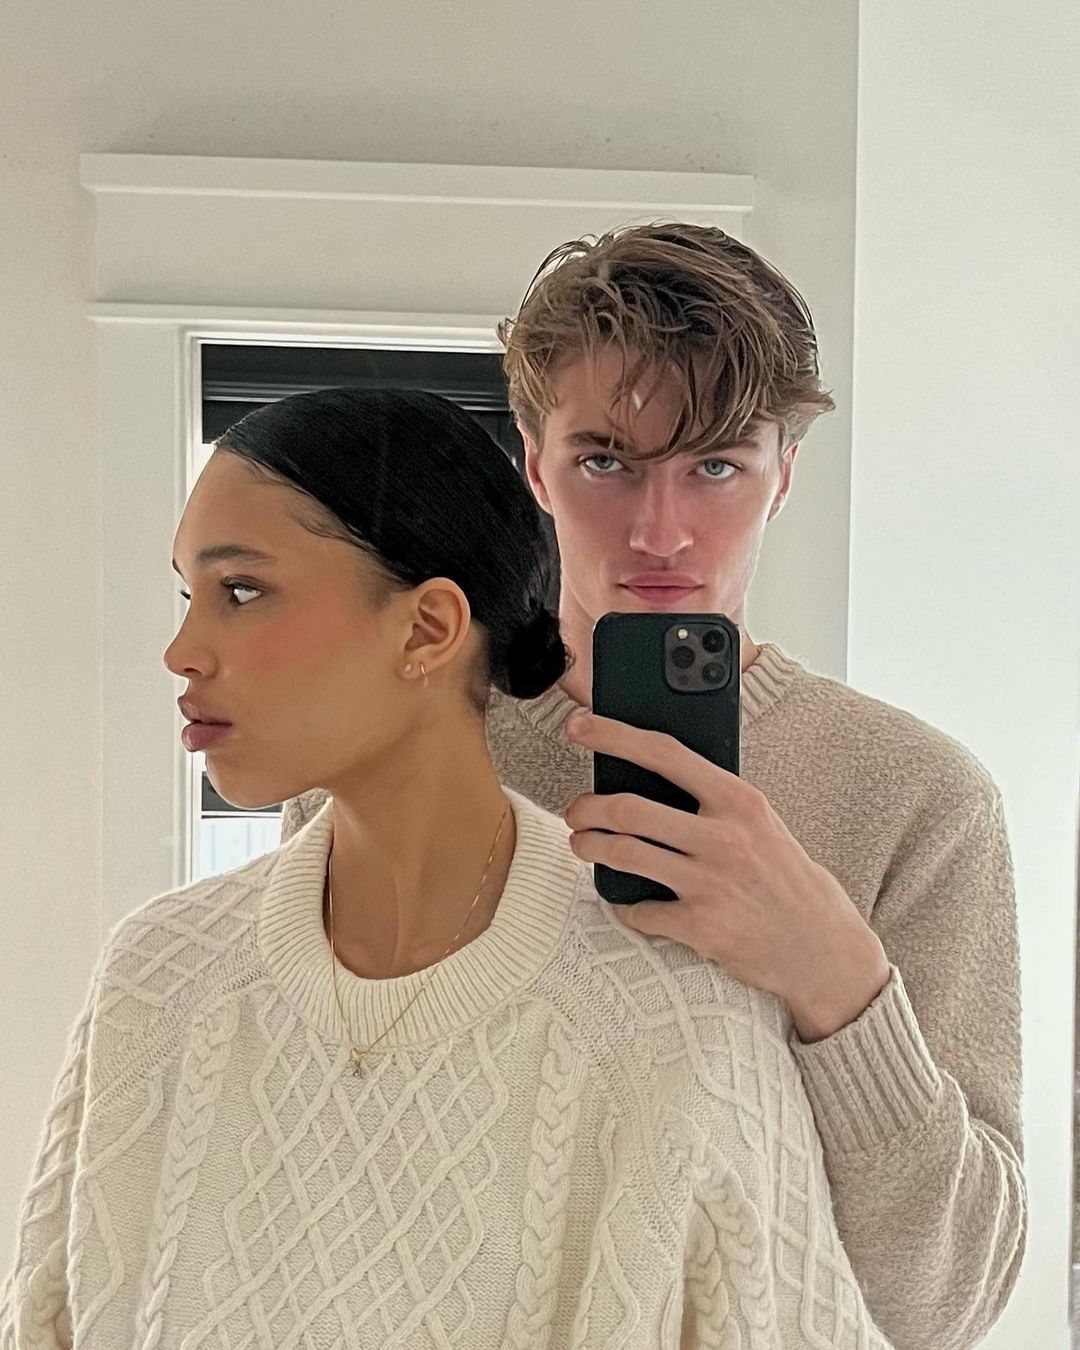 Nara Smith and her husband, Lucky Blue Smith, have been trolled for their choice of baby name.